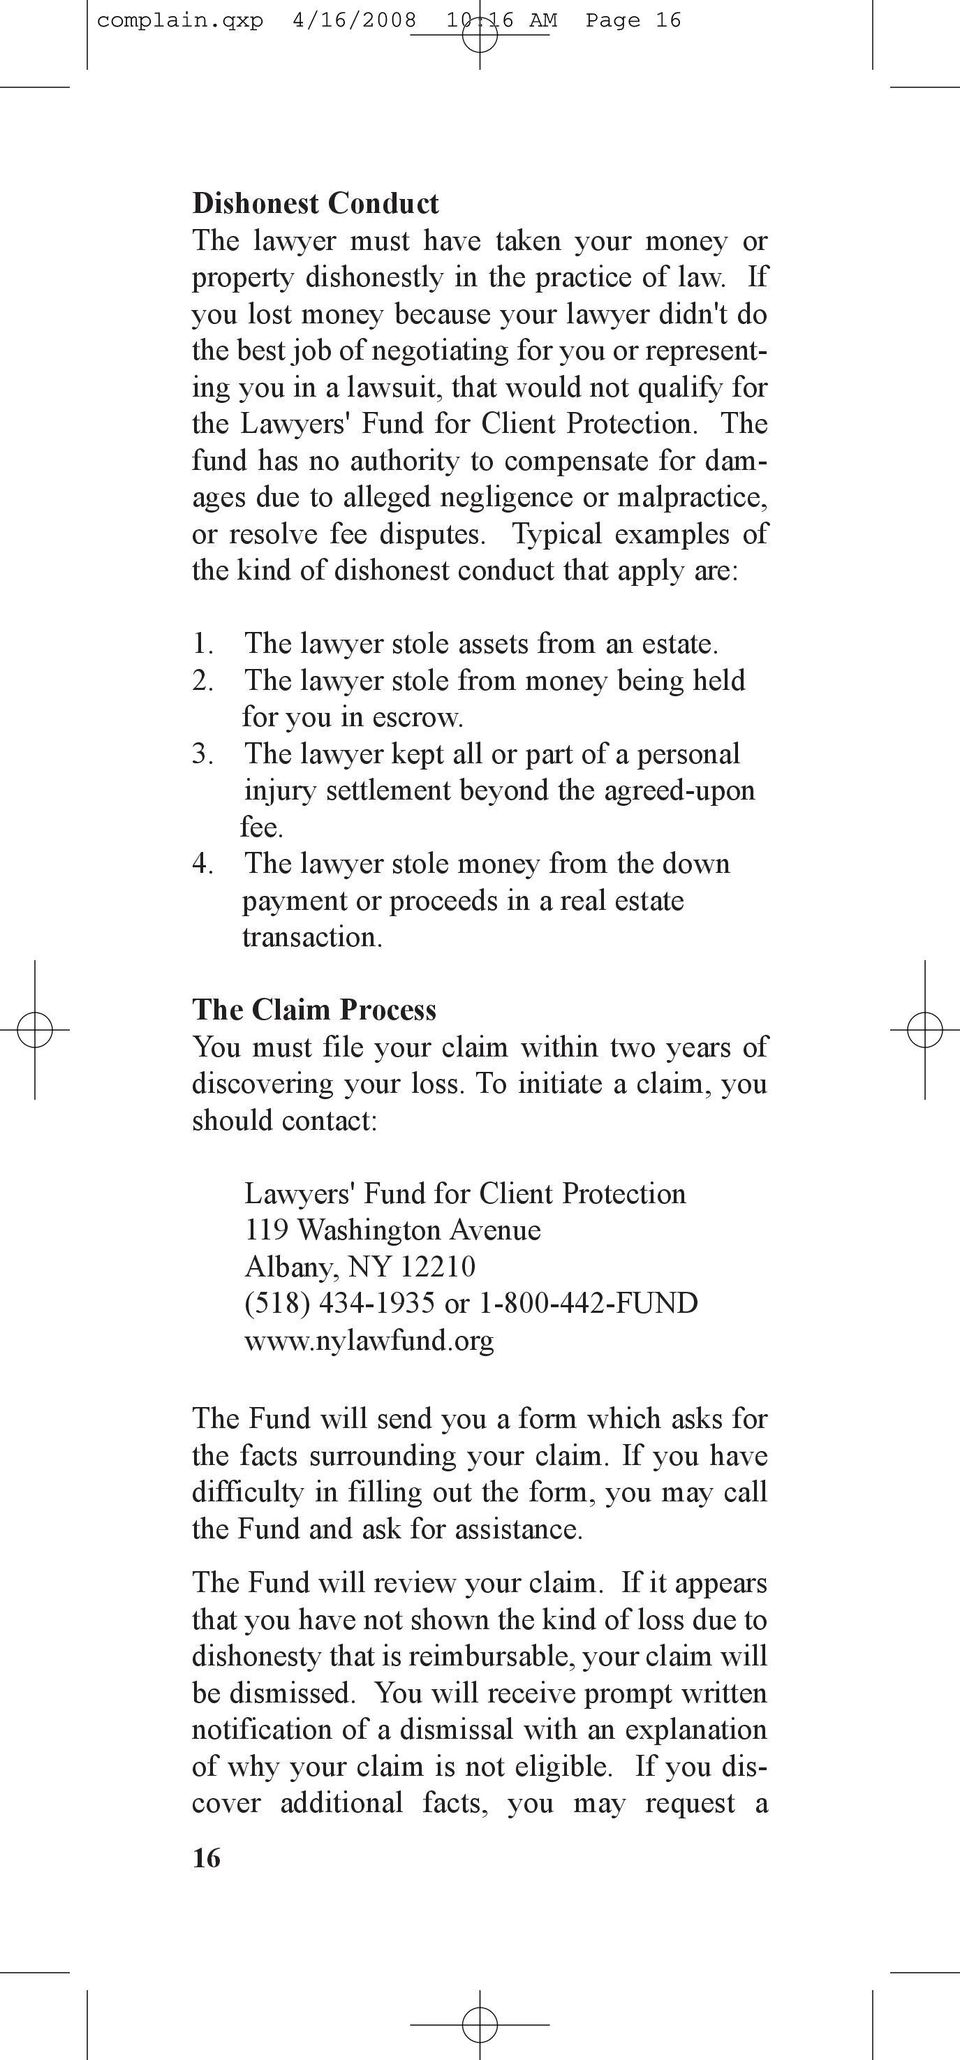 The fund has no authority to compensate for damages due to alleged negligence or malpractice, or resolve fee disputes. Typical examples of the kind of dishonest conduct that apply are: 1.